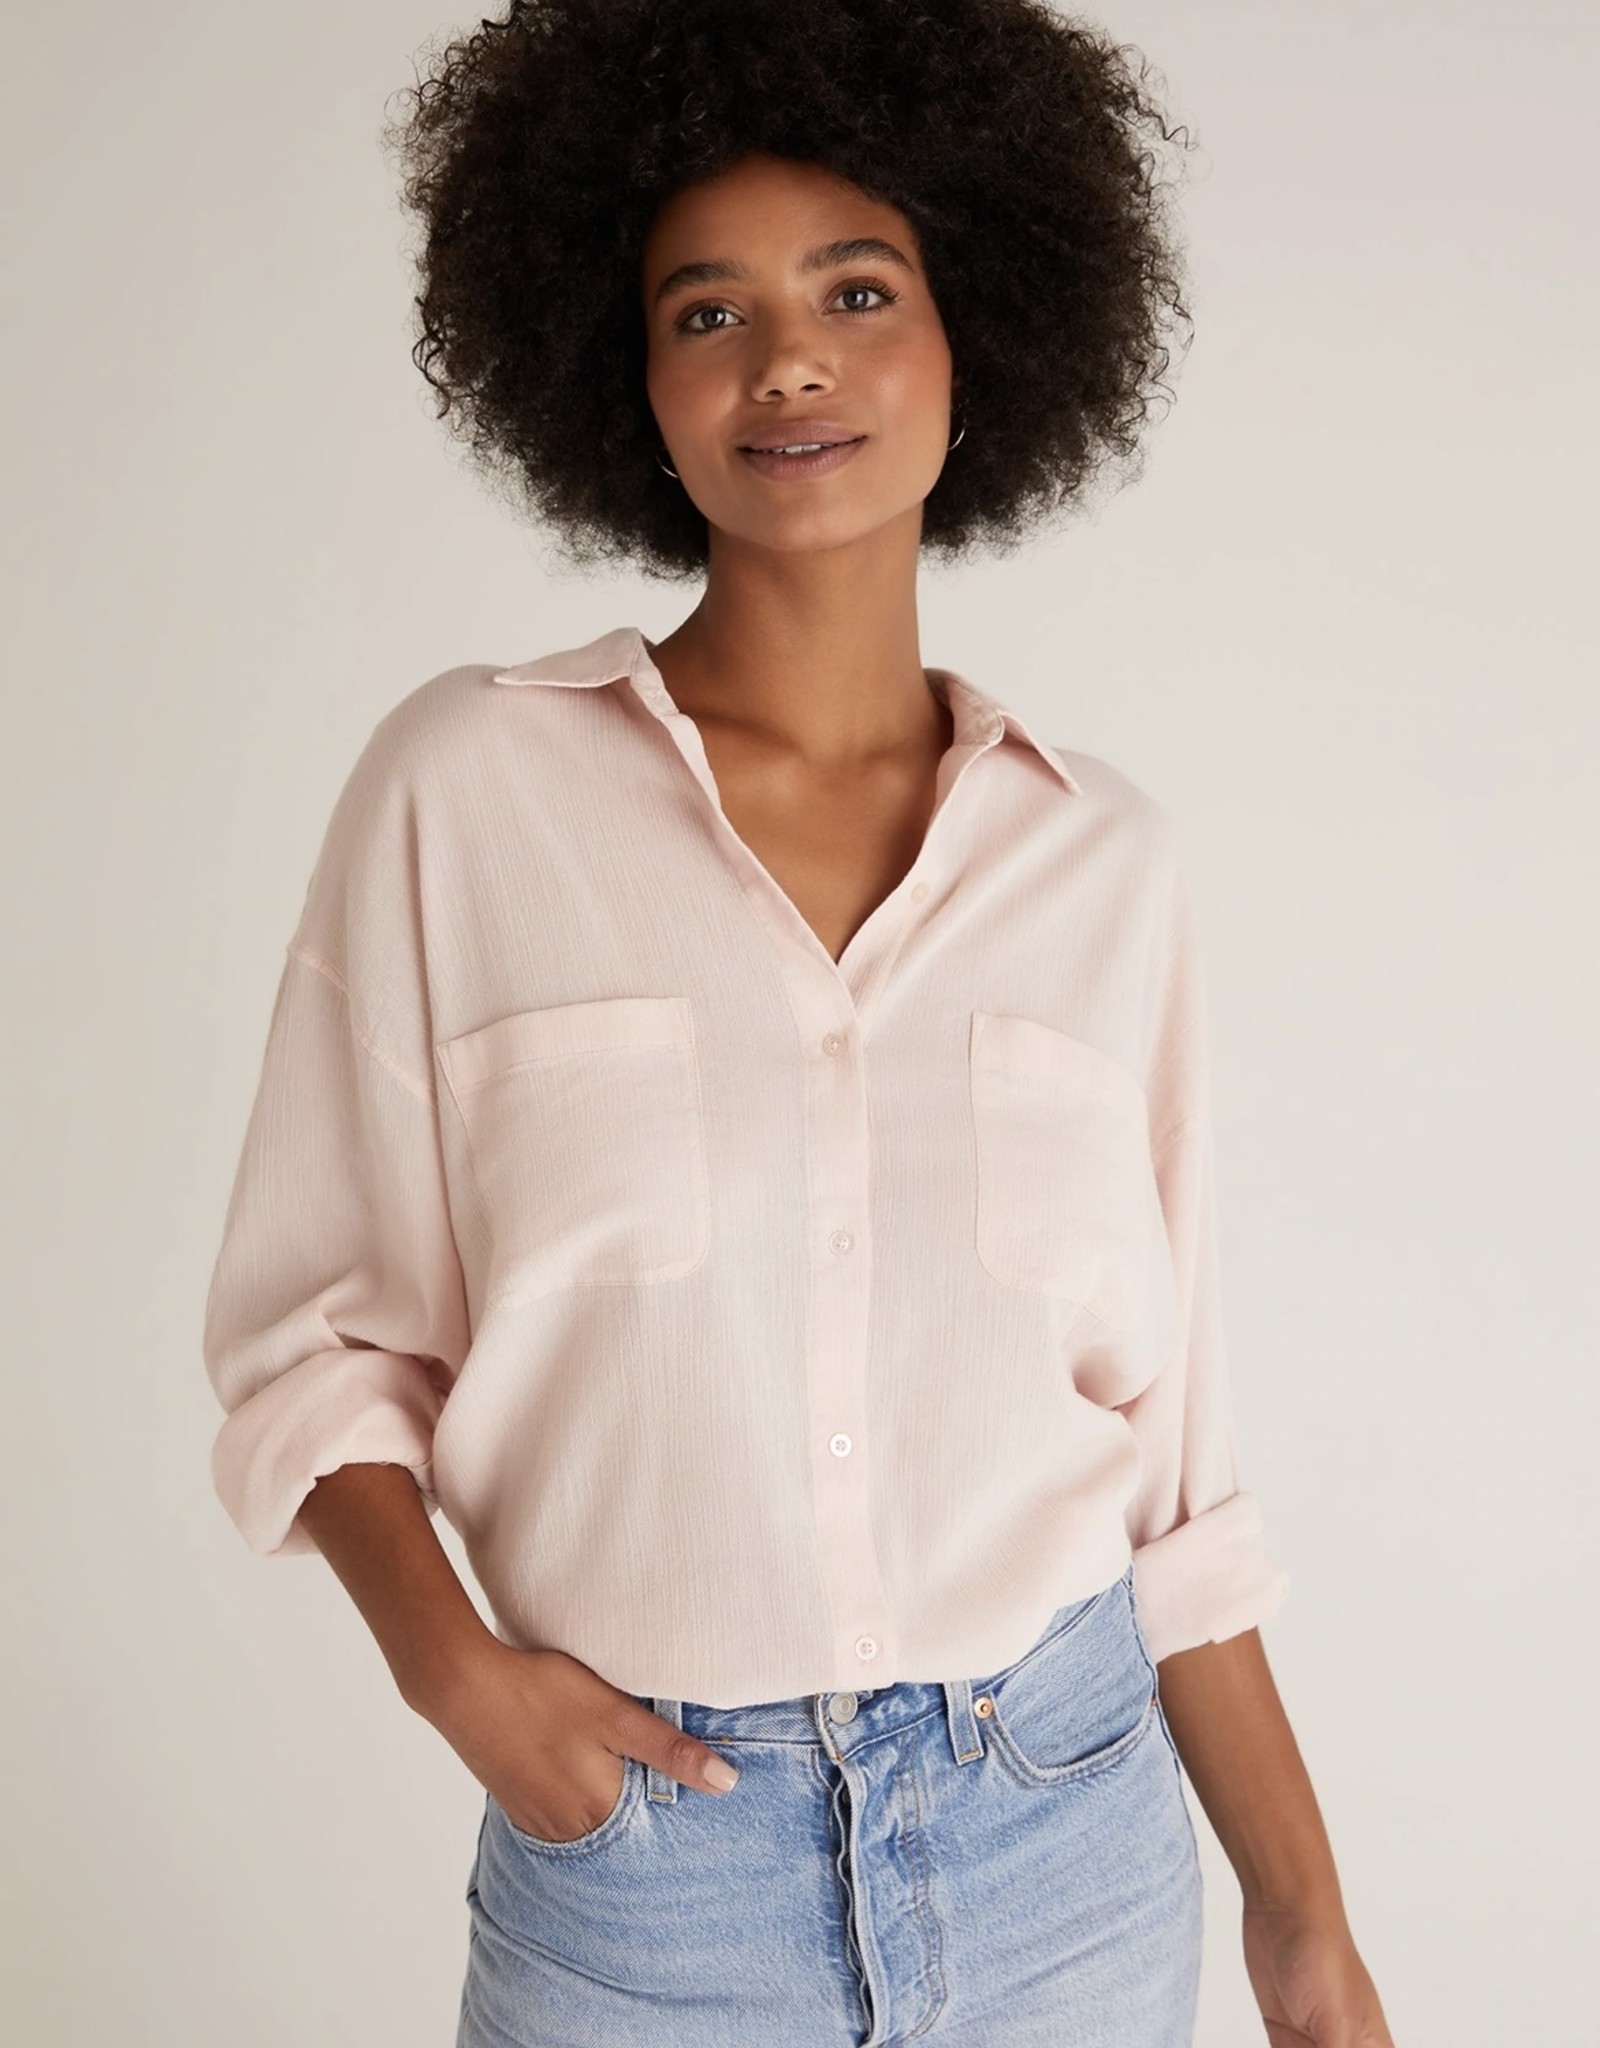 Lalo Button Up Top